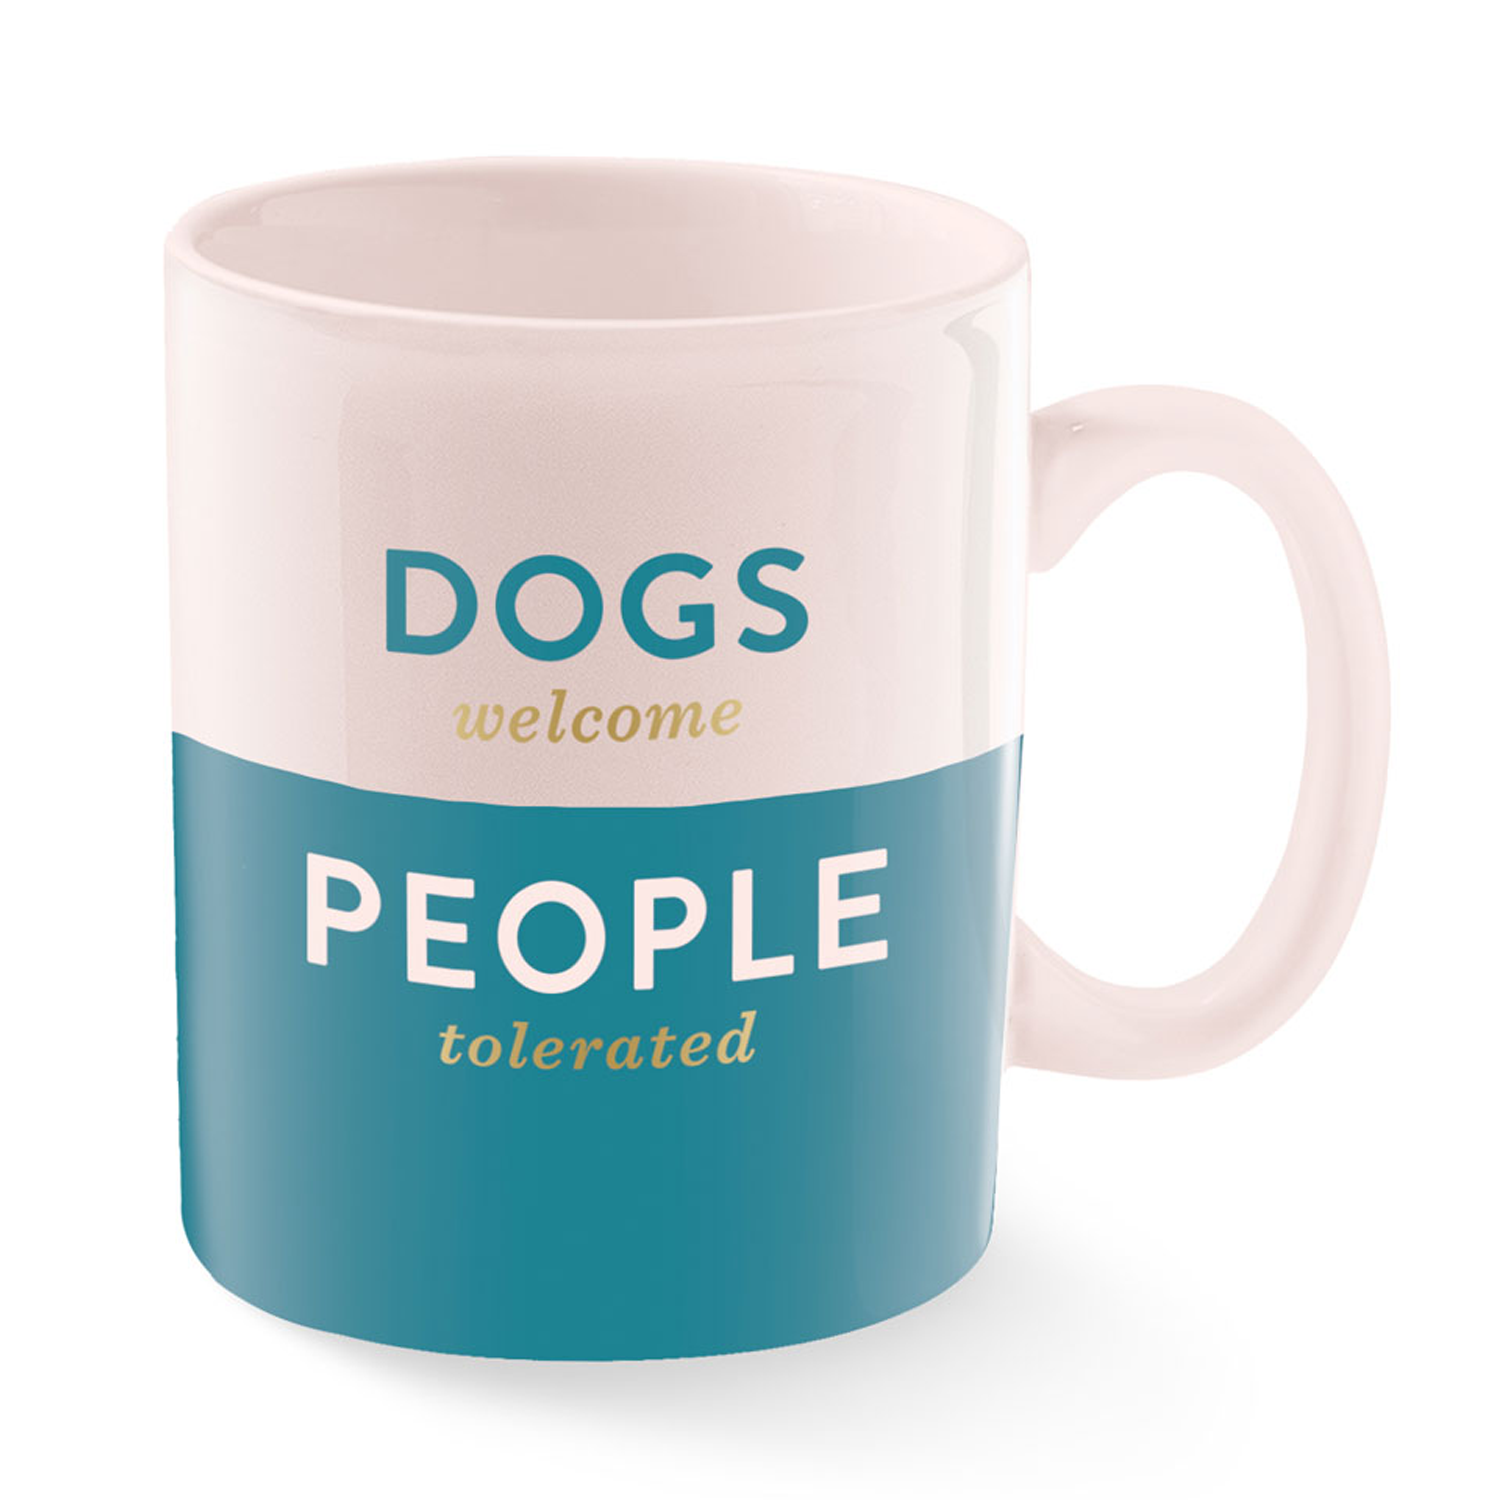 Dog Accessories - dogs welcome people tolerated pink and blue mug